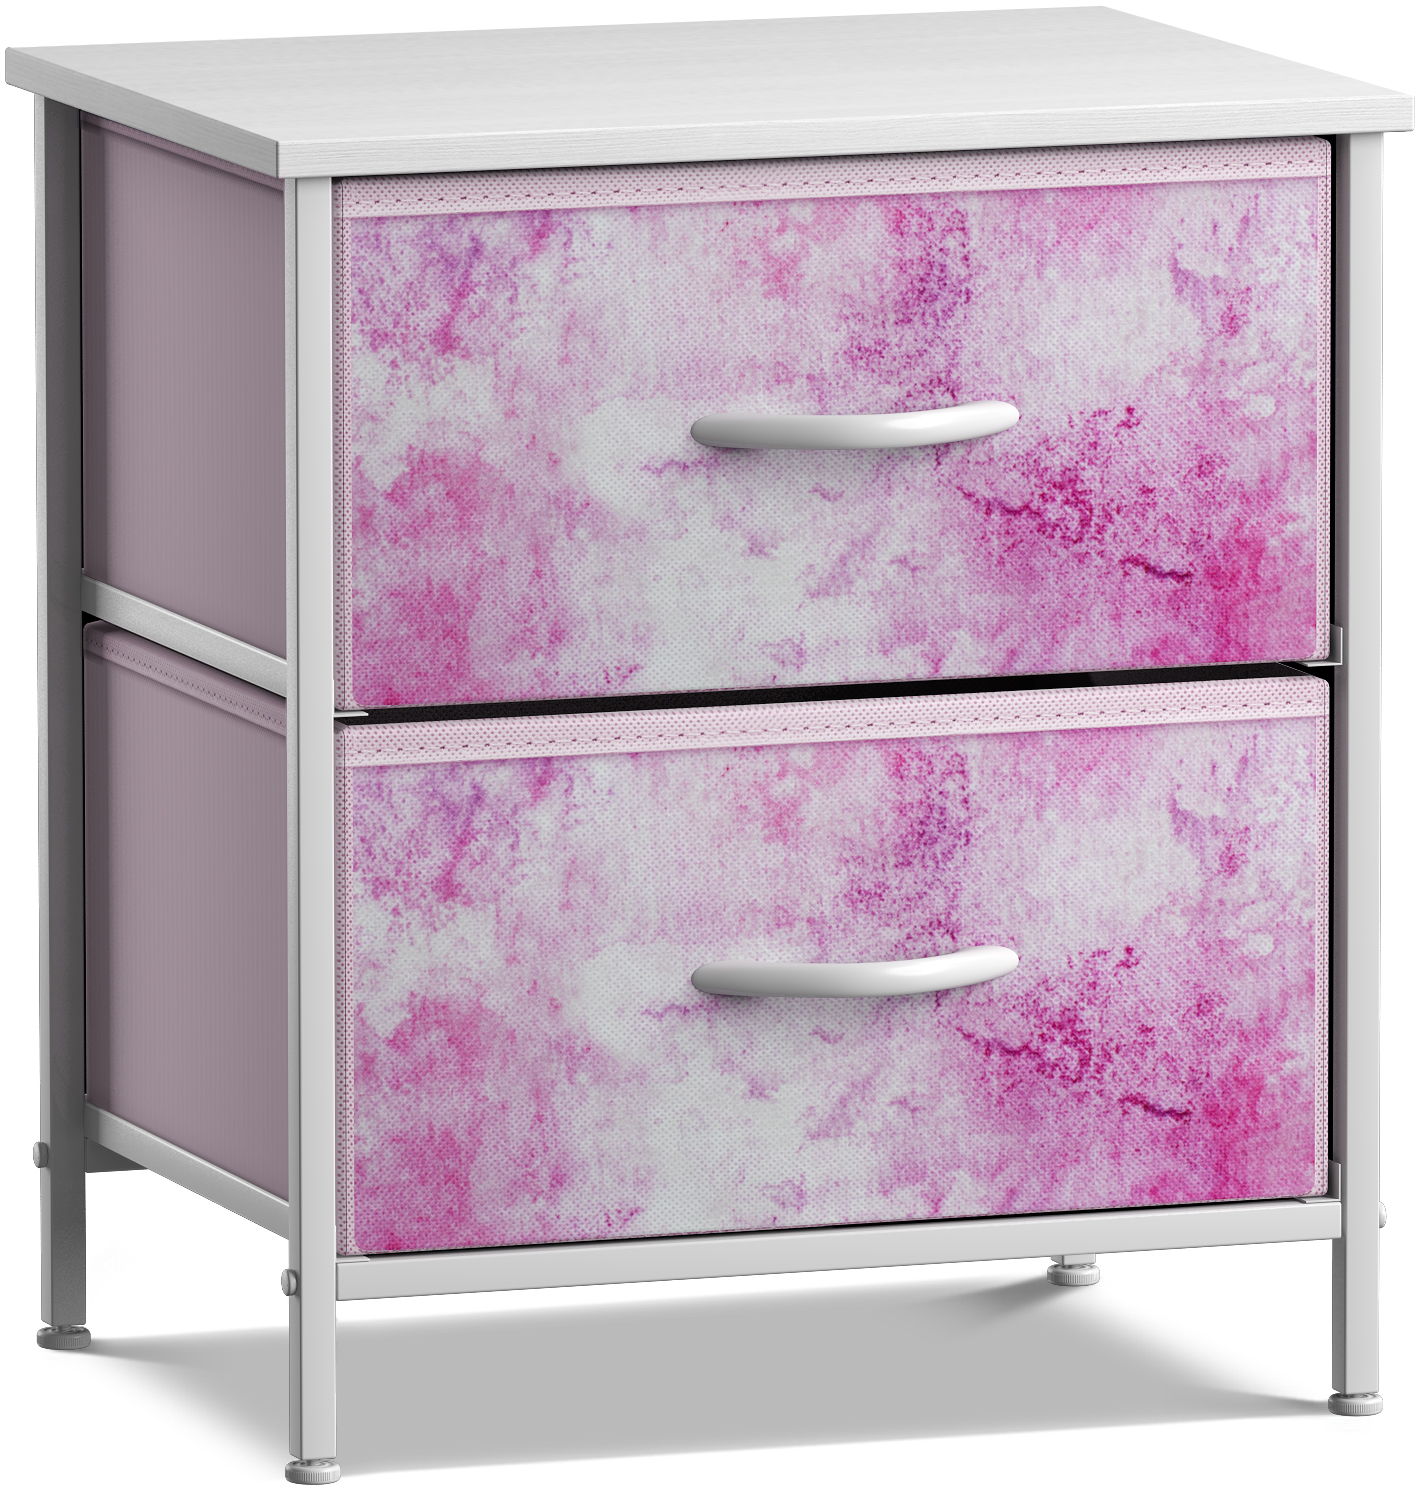 Sorbus Nightstand with Drawers Bedside Furniture  Accent End Table  Chest for Home, Bedroom Accessories, Office, College Dorm, Steel Frame,  Wood Top, Easy Pull Fabric Bins (2-Drawer, Pink)